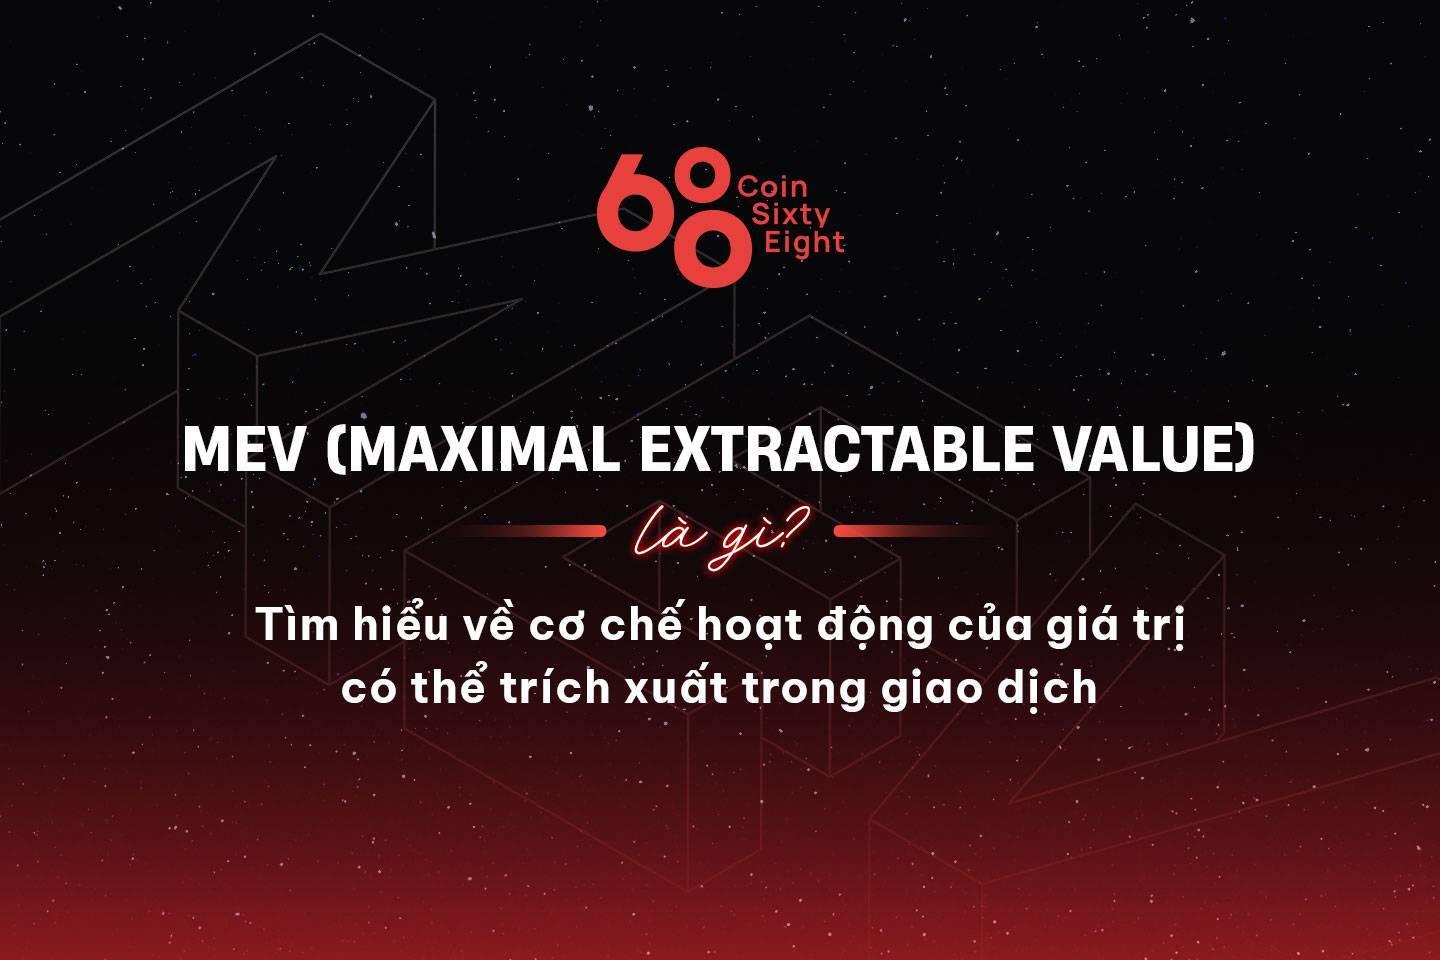 mev-maximal-extractable-value-la-gi-tim-hieu-ve-co-che-hoat-dong-cua-gia-tri-co-the-trich-xuat-trong-giao-dich